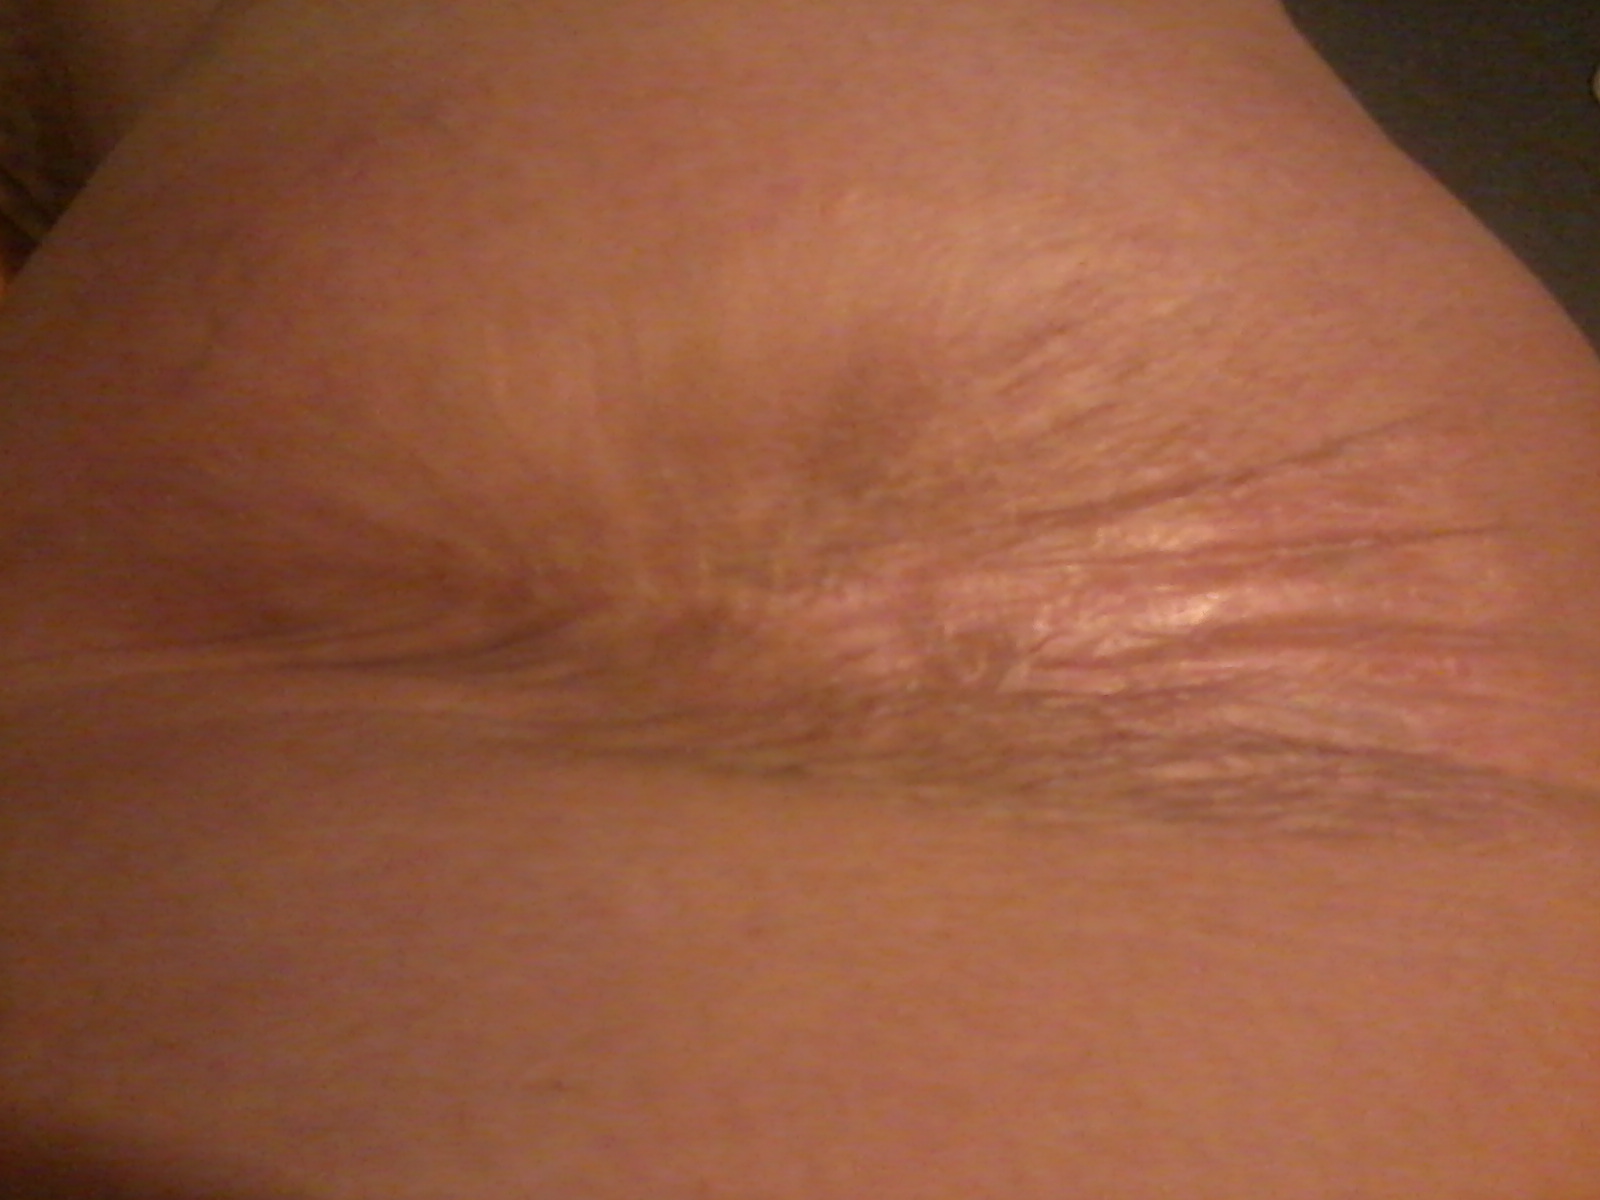 This is the scar I have on my right leg as a result of two operations.